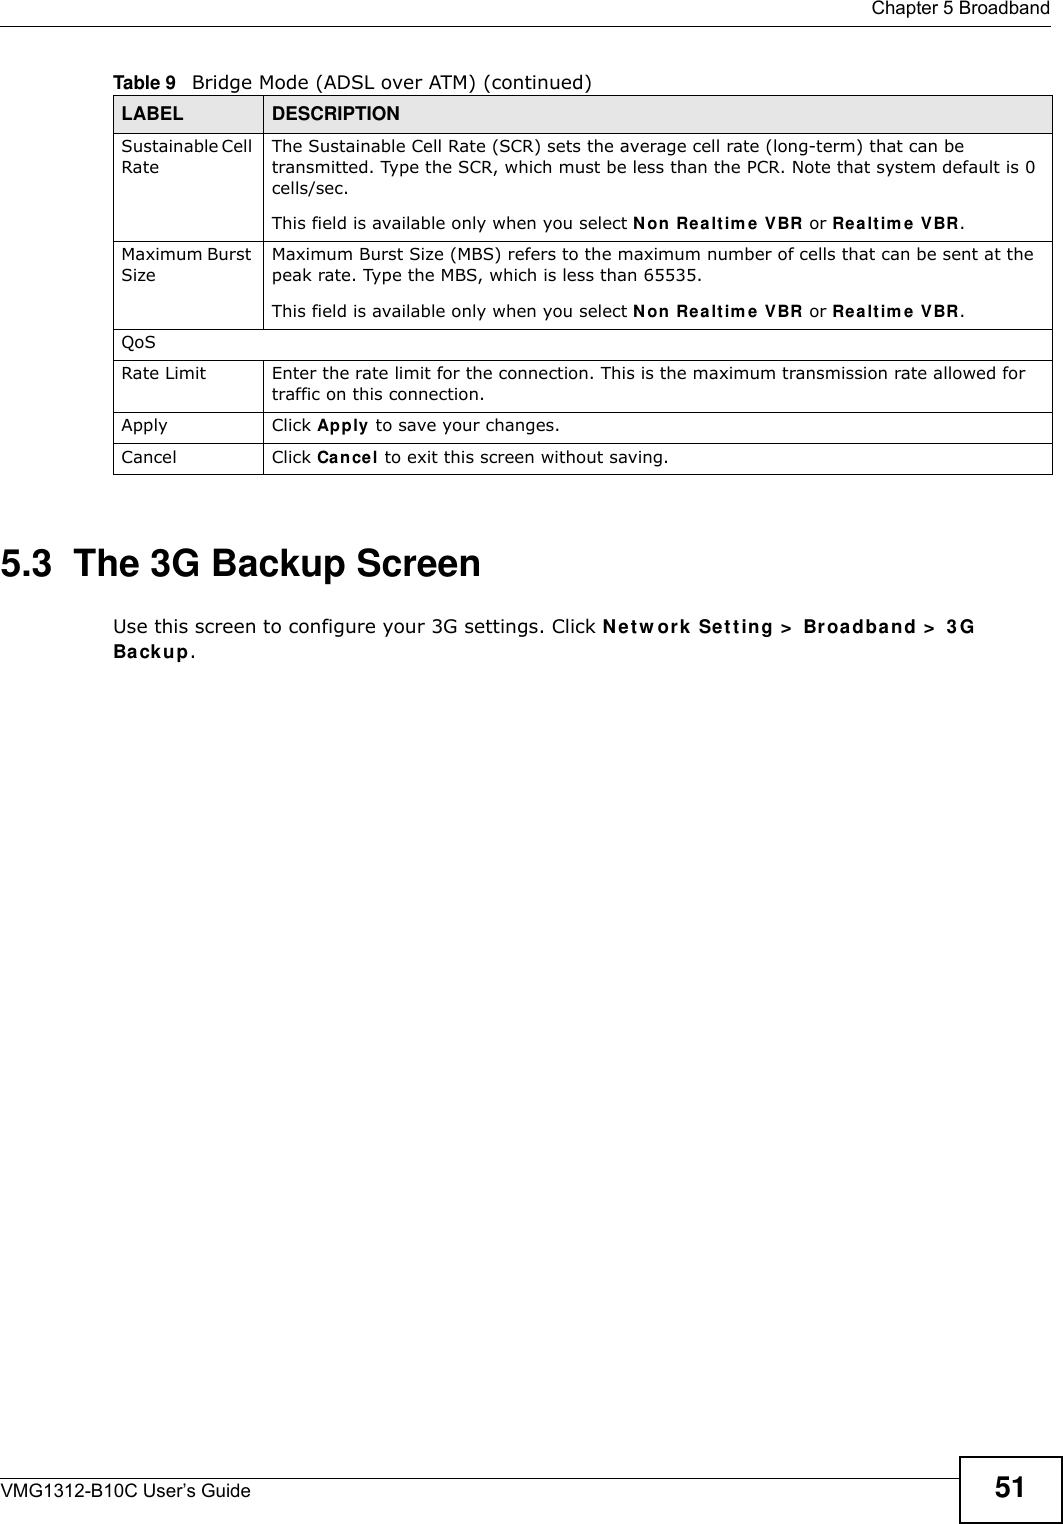  Chapter 5 BroadbandVMG1312-B10C User’s Guide 515.3  The 3G Backup ScreenUse this screen to configure your 3G settings. Click Ne t w ork  Se t t ing &gt;  Broa dba nd &gt;  3 G Backup.Sustainable Cell RateThe Sustainable Cell Rate (SCR) sets the average cell rate (long-term) that can be transmitted. Type the SCR, which must be less than the PCR. Note that system default is 0 cells/sec. This field is available only when you select Non  Rea lt im e V BR or Re a lt im e VBR.Maximum Burst SizeMaximum Burst Size (MBS) refers to the maximum number of cells that can be sent at the peak rate. Type the MBS, which is less than 65535.This field is available only when you select Non  Rea lt im e V BR or Re a lt im e VBR.QoSRate Limit Enter the rate limit for the connection. This is the maximum transmission rate allowed for traffic on this connection.Apply Click Apply to save your changes.Cancel Click Cancel to exit this screen without saving.Table 9   Bridge Mode (ADSL over ATM) (continued)LABEL DESCRIPTION